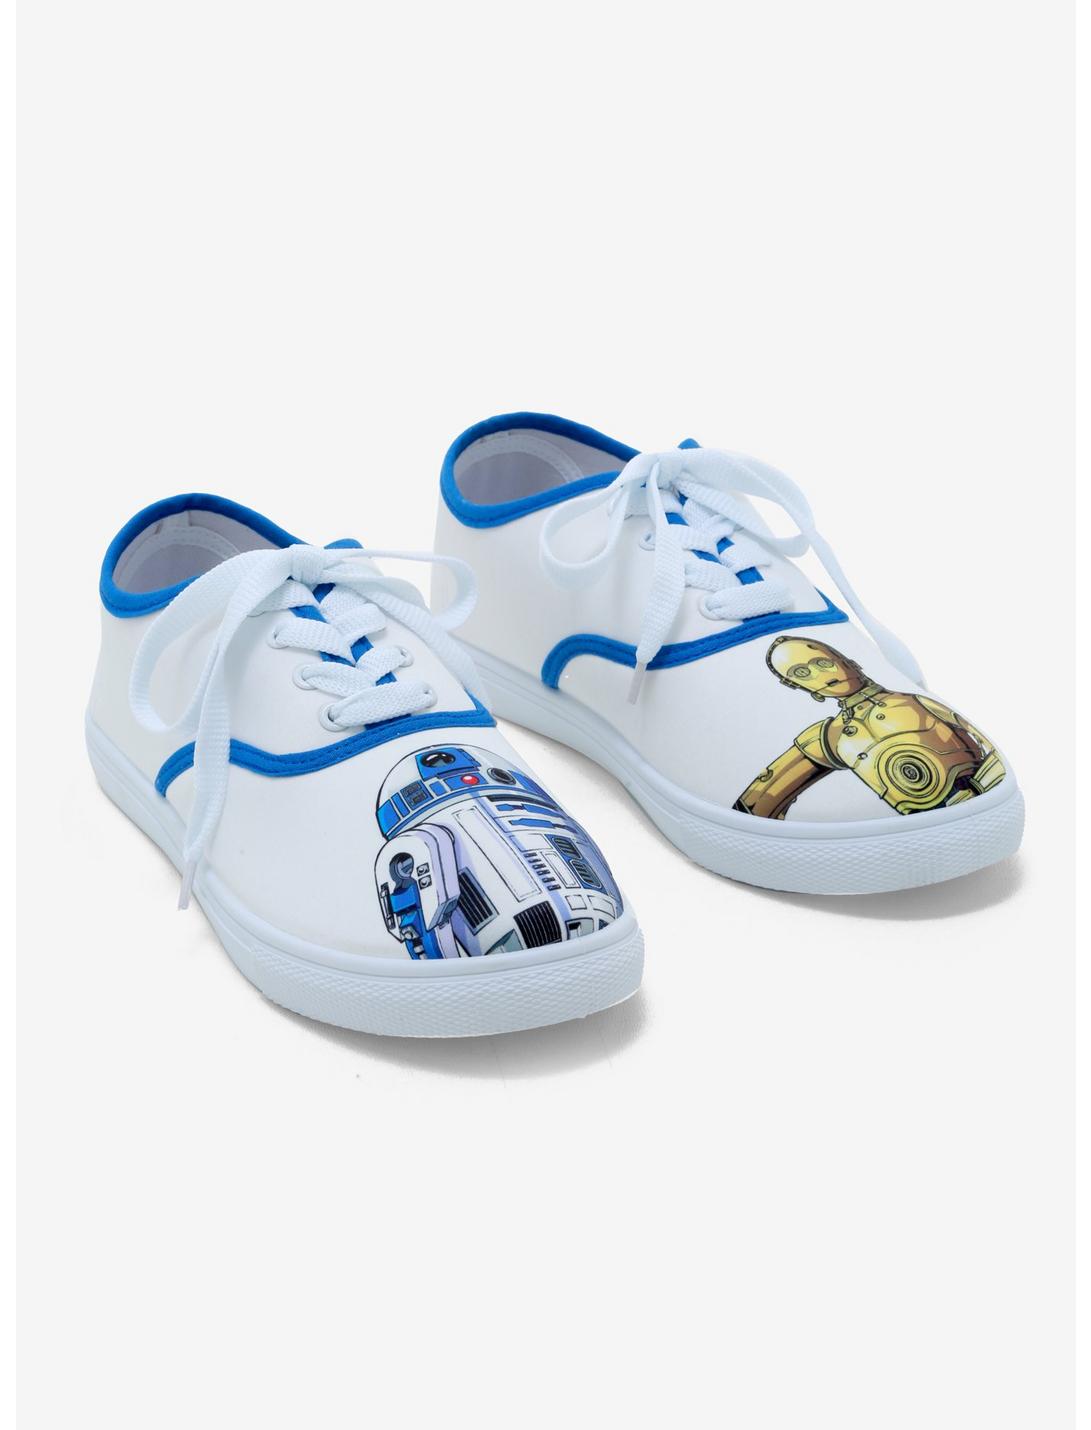 Star Wars R2-D2 & C-3PO Lace-Up Sneakers, MULTI, hi-res